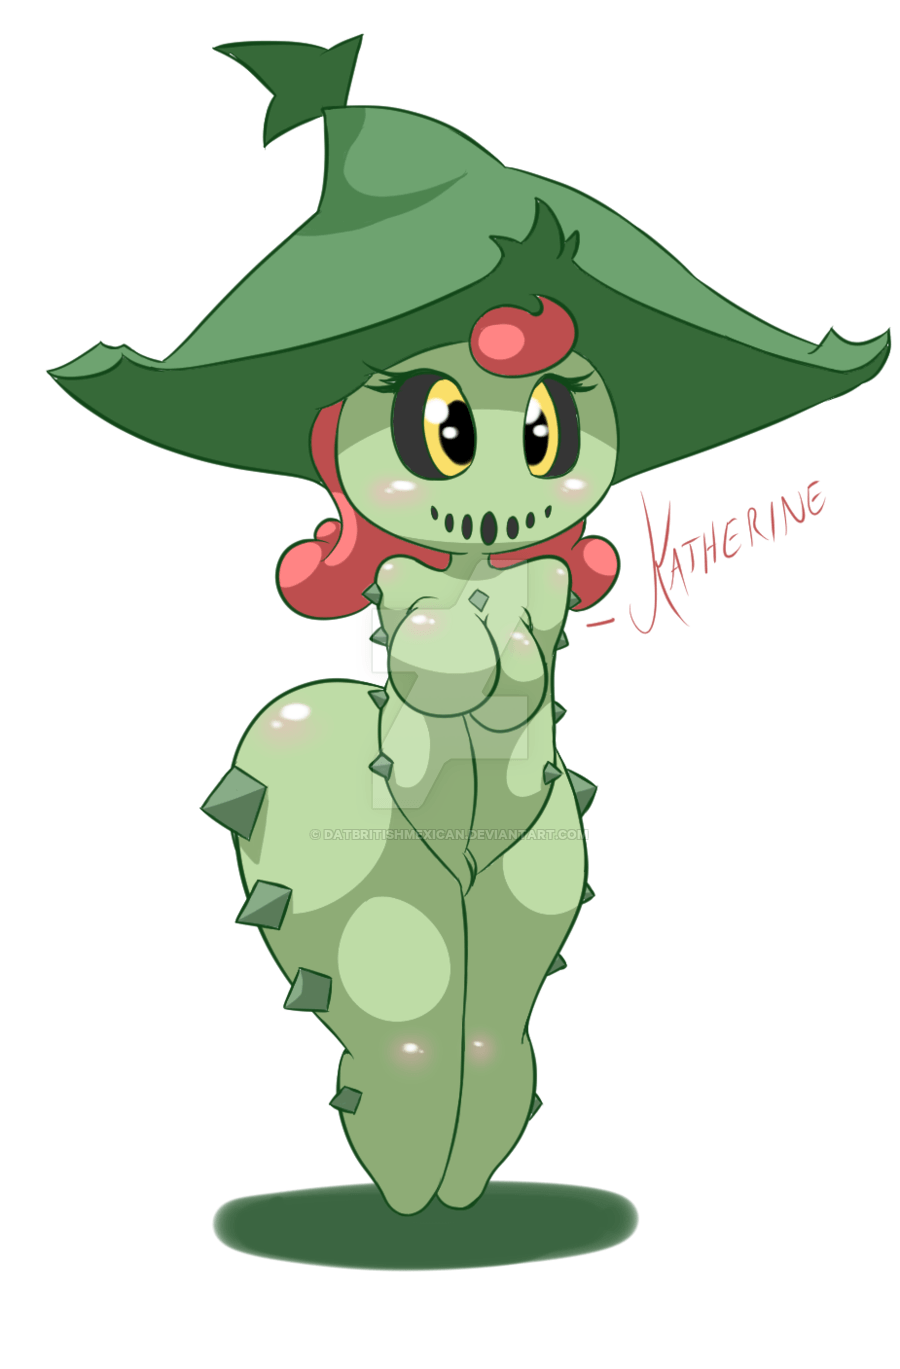 Katherine the Cacturne